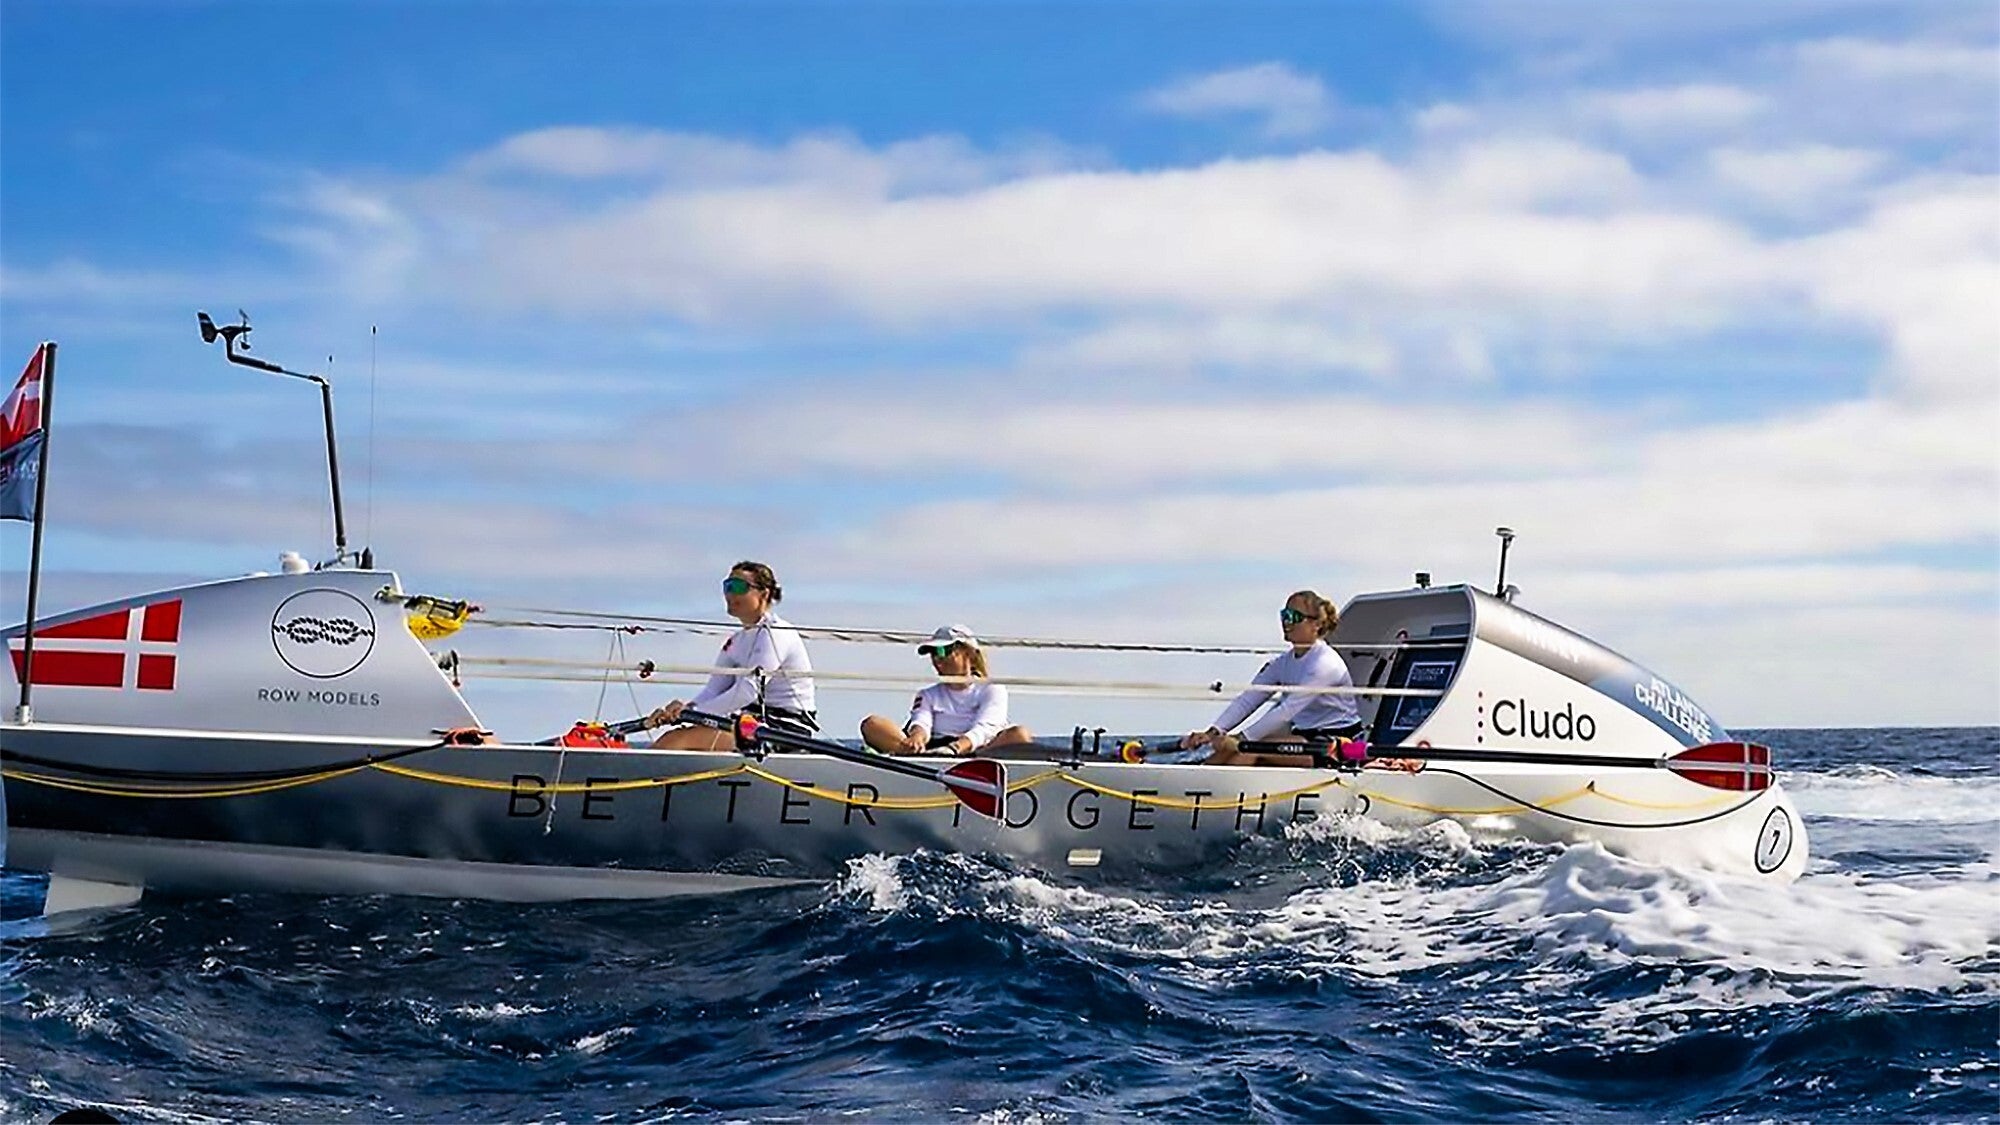 The First Danish Women's Boat Rowing Across the Atlantic - Part 2